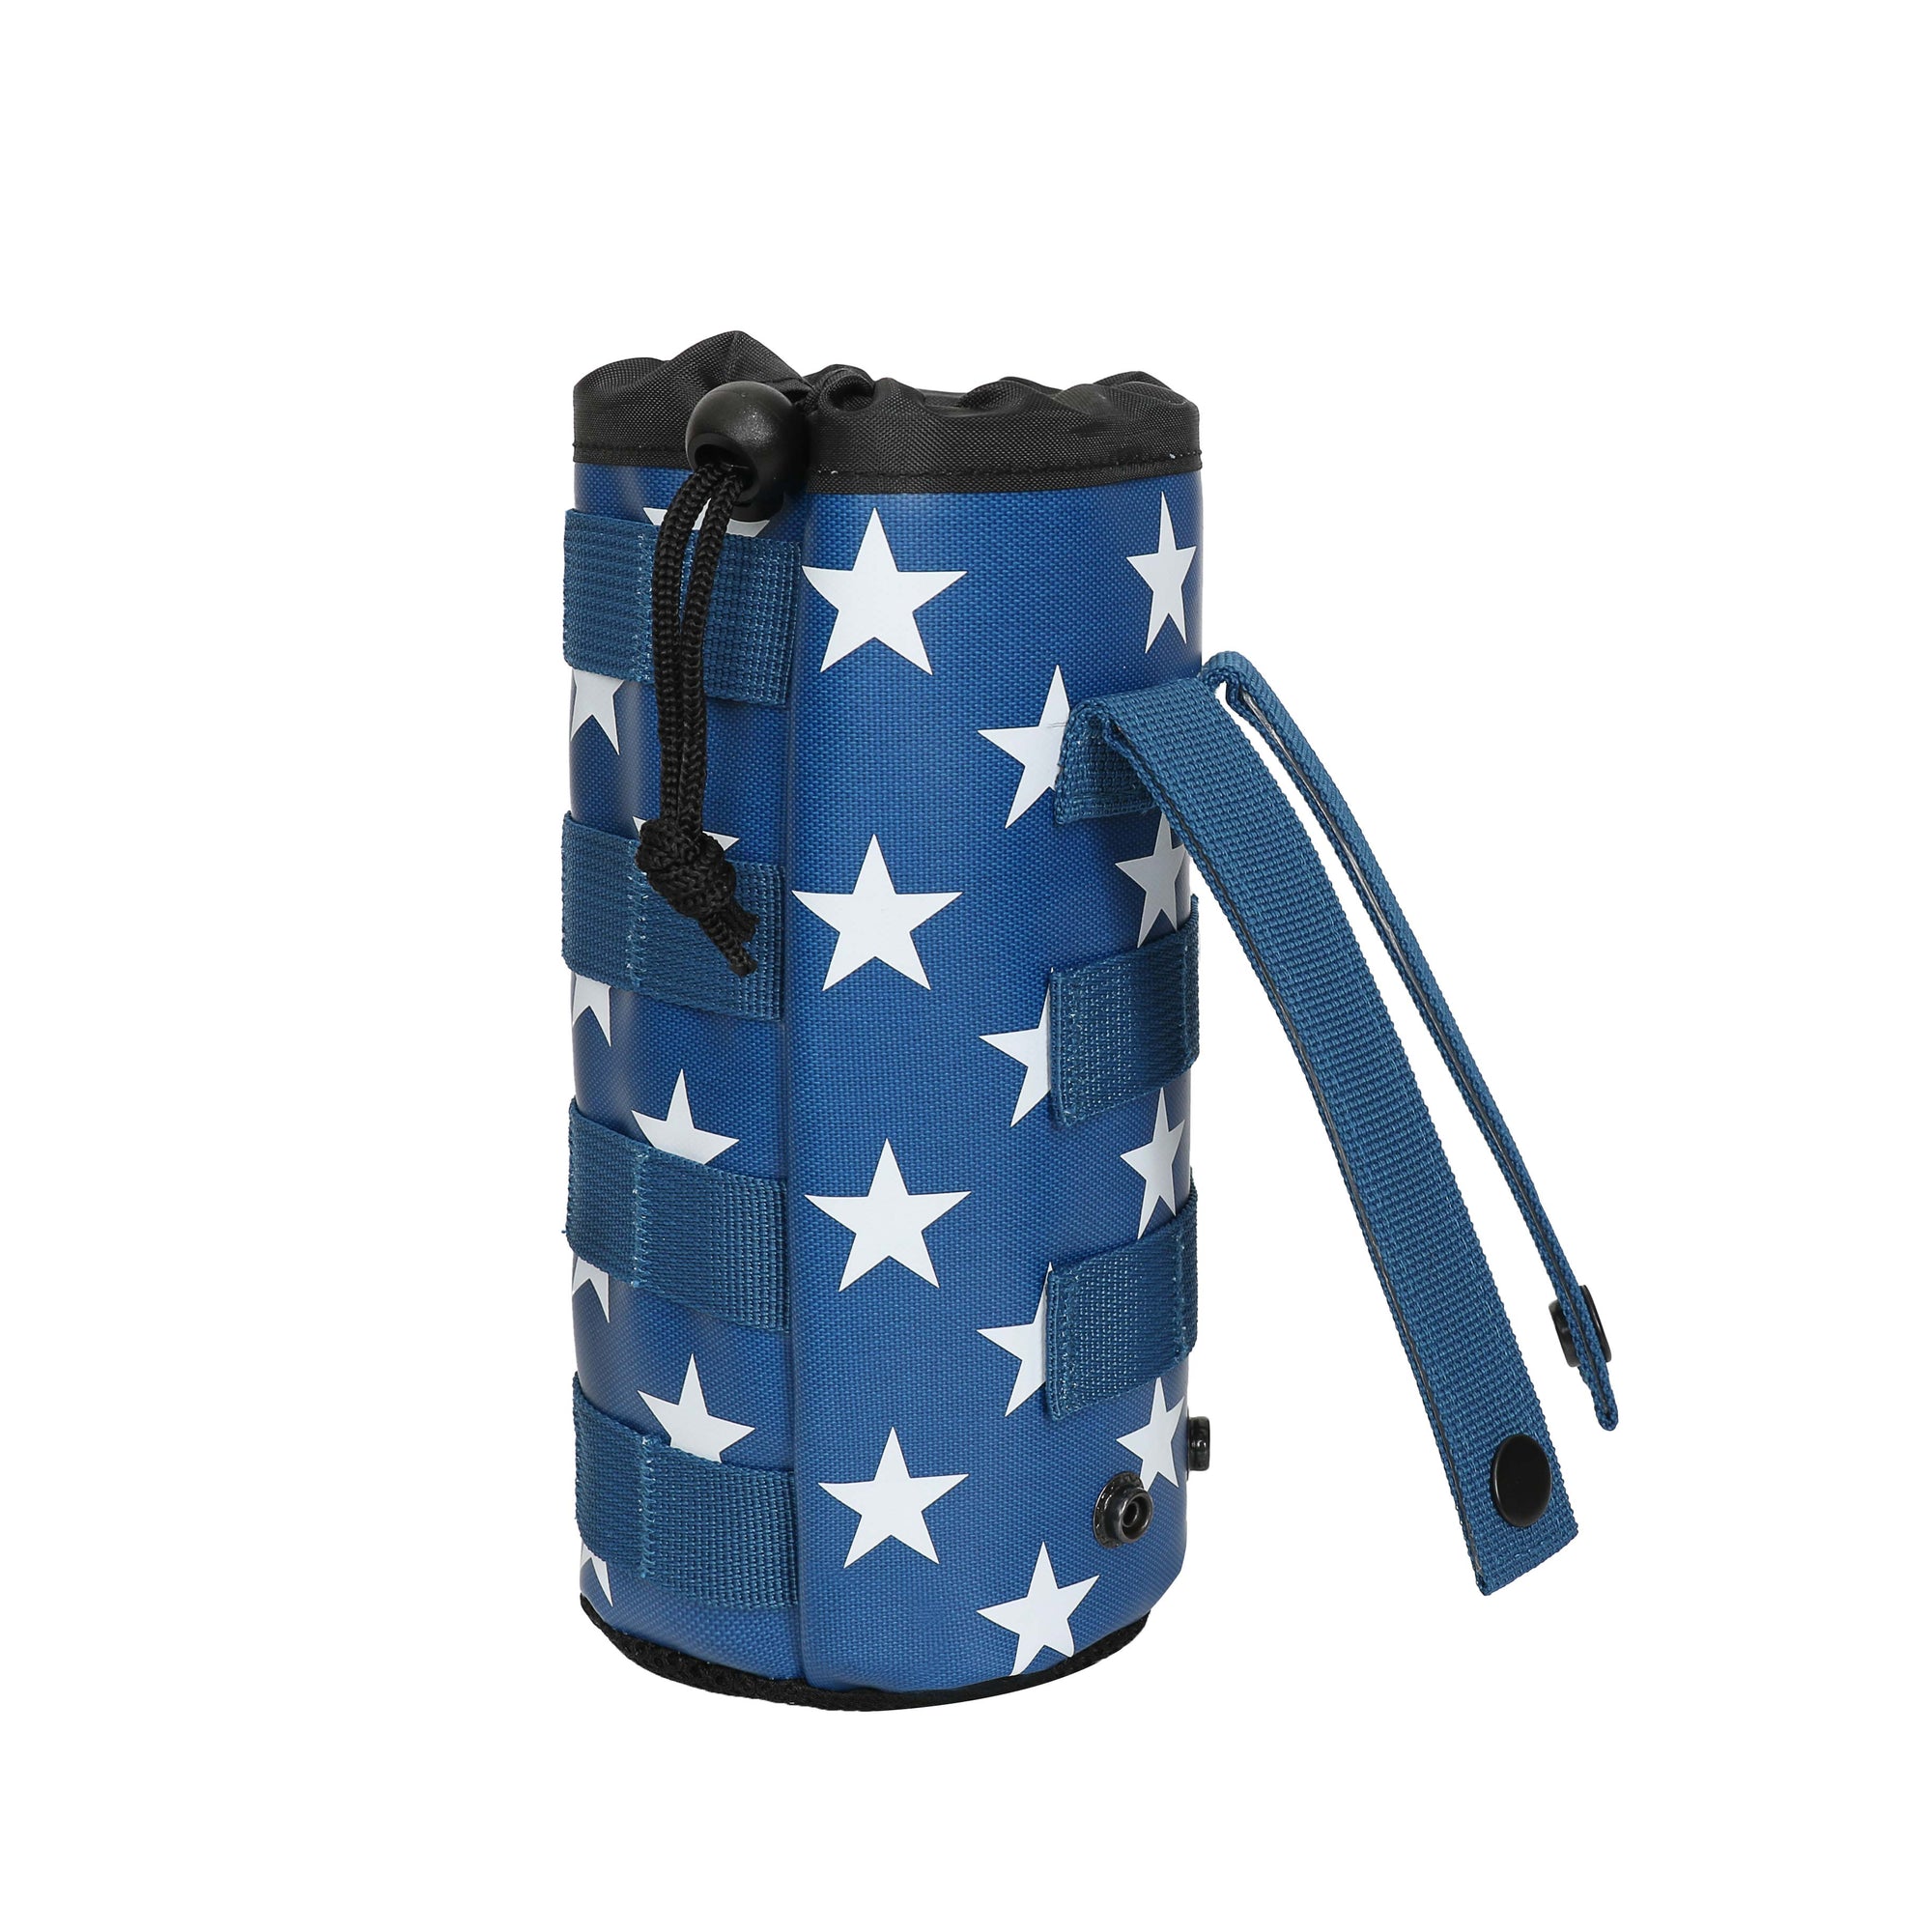 The Patriot Drink Sleeve Attachment